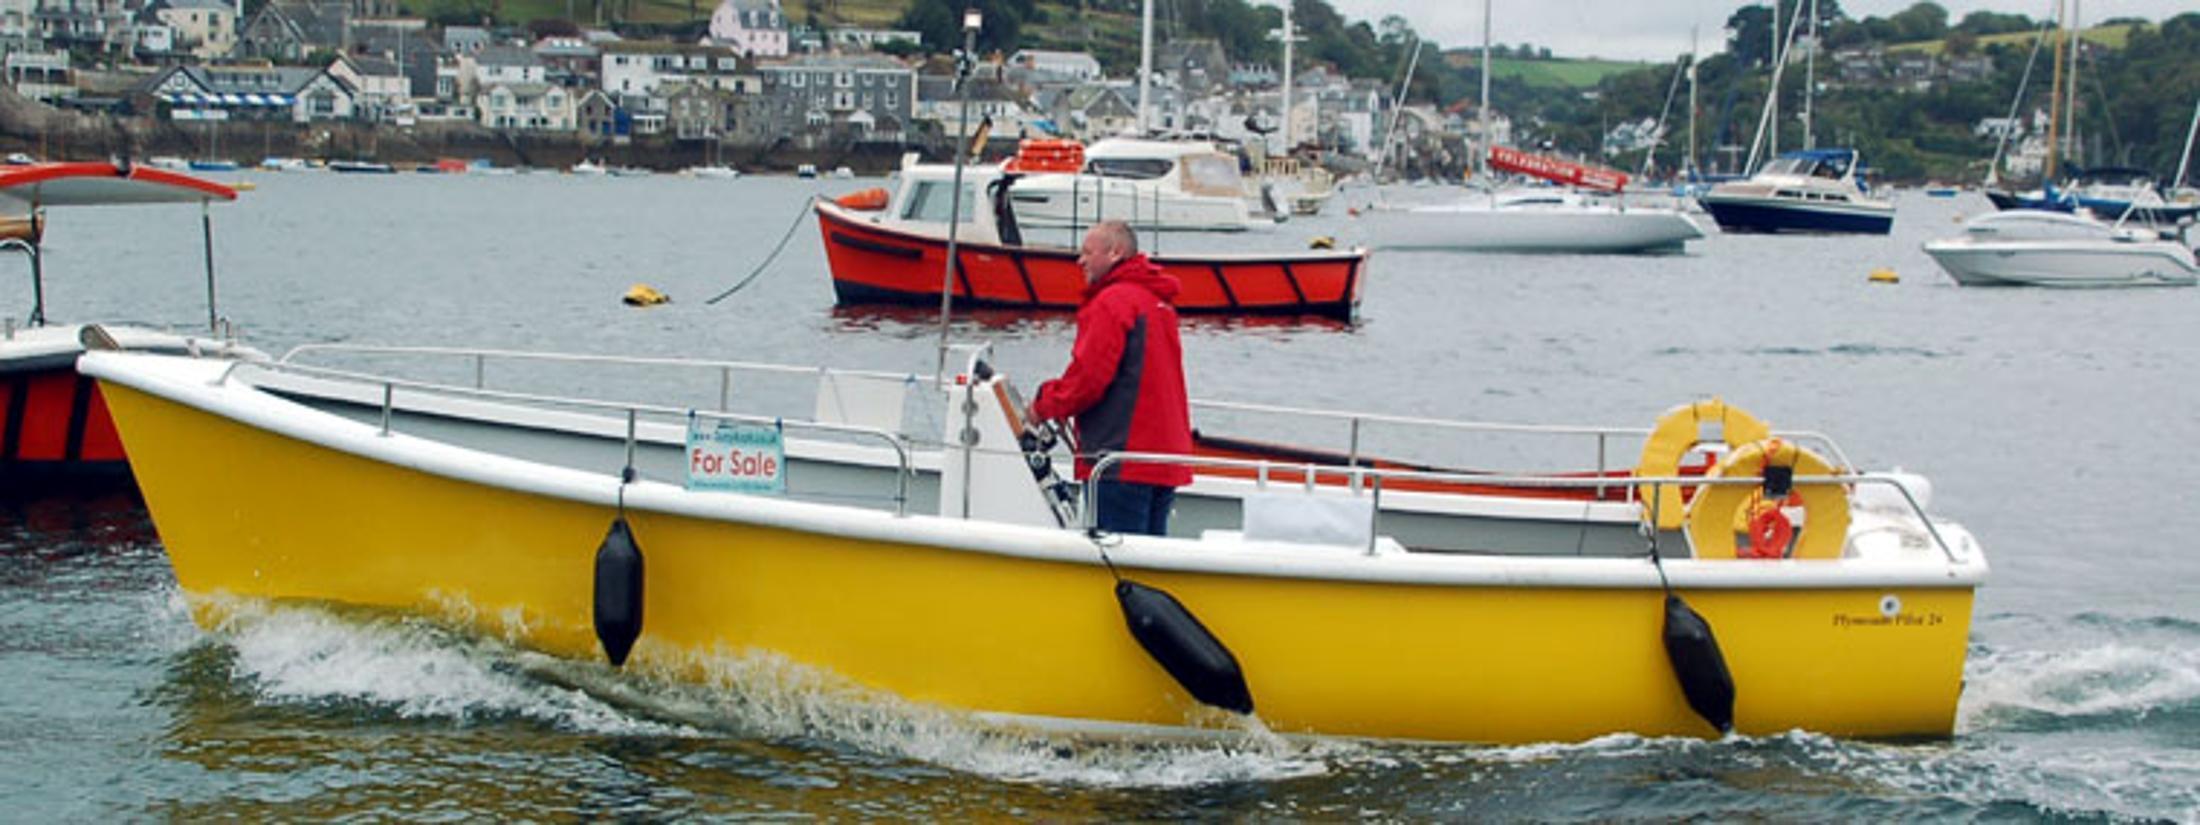 Plymouth Pilot Water Taxi, Cornwall